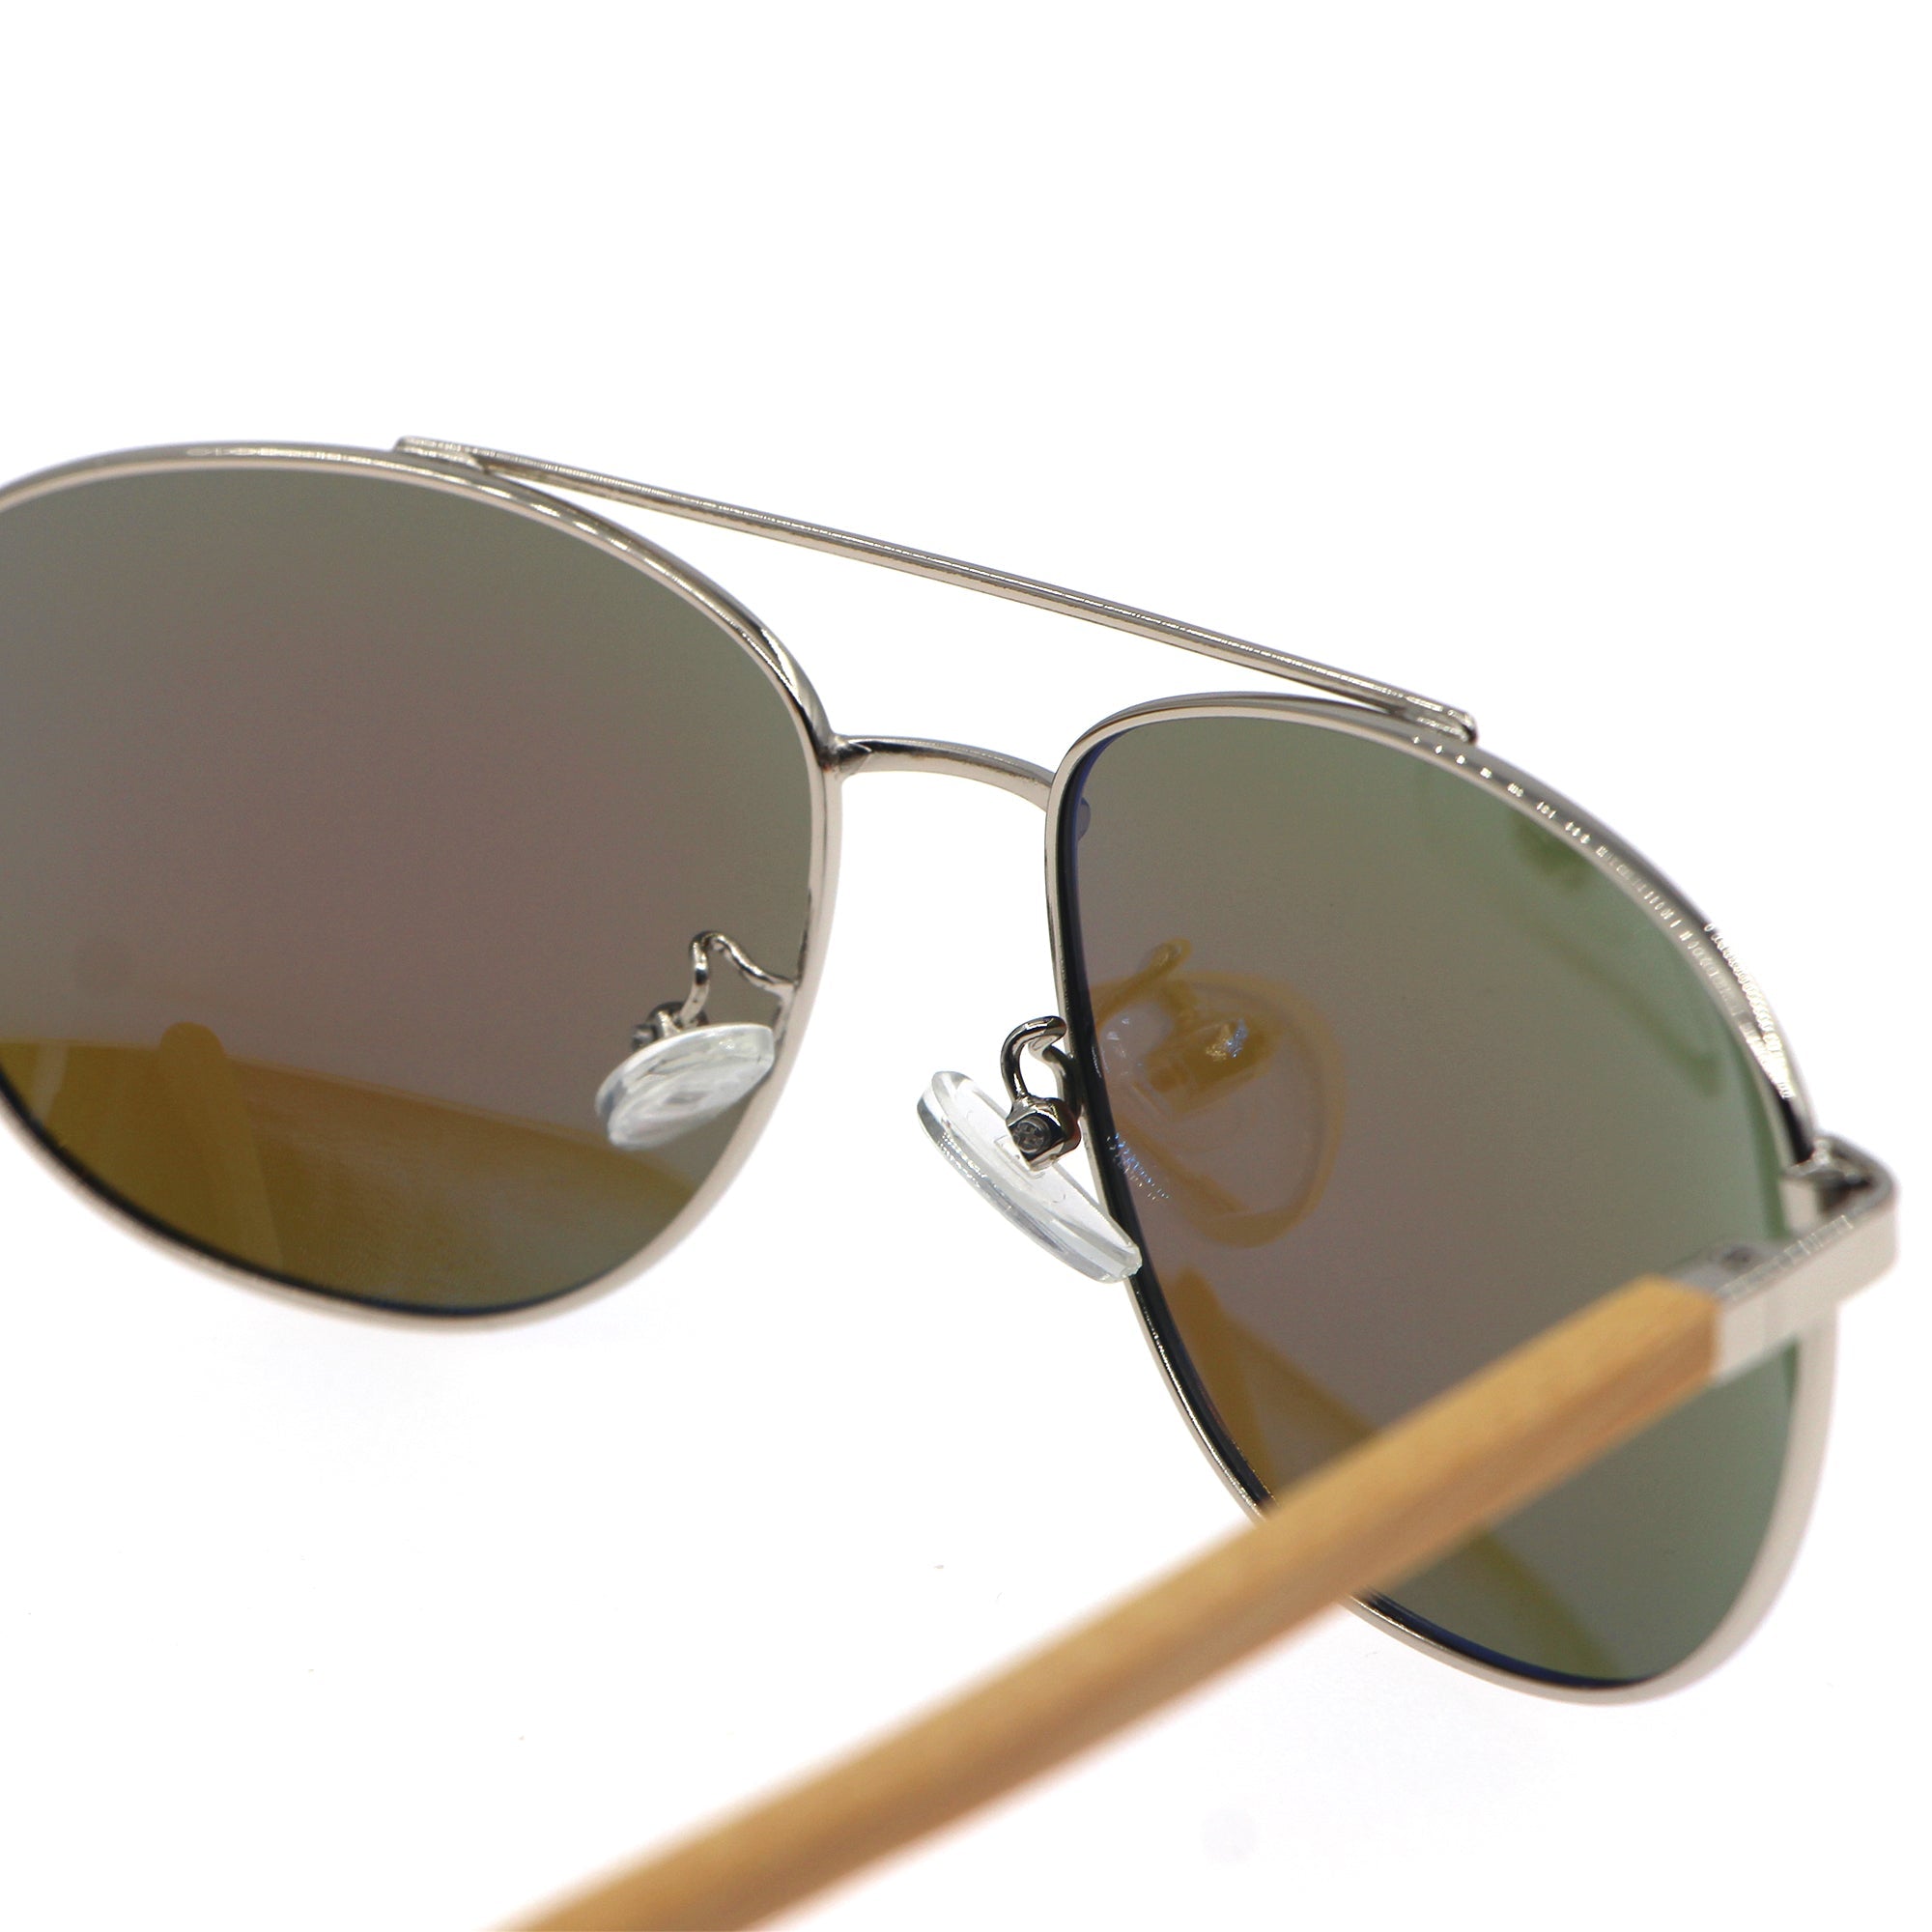 Dilicn FREE GIFT Polarized Metal Bamboo Sunglasses